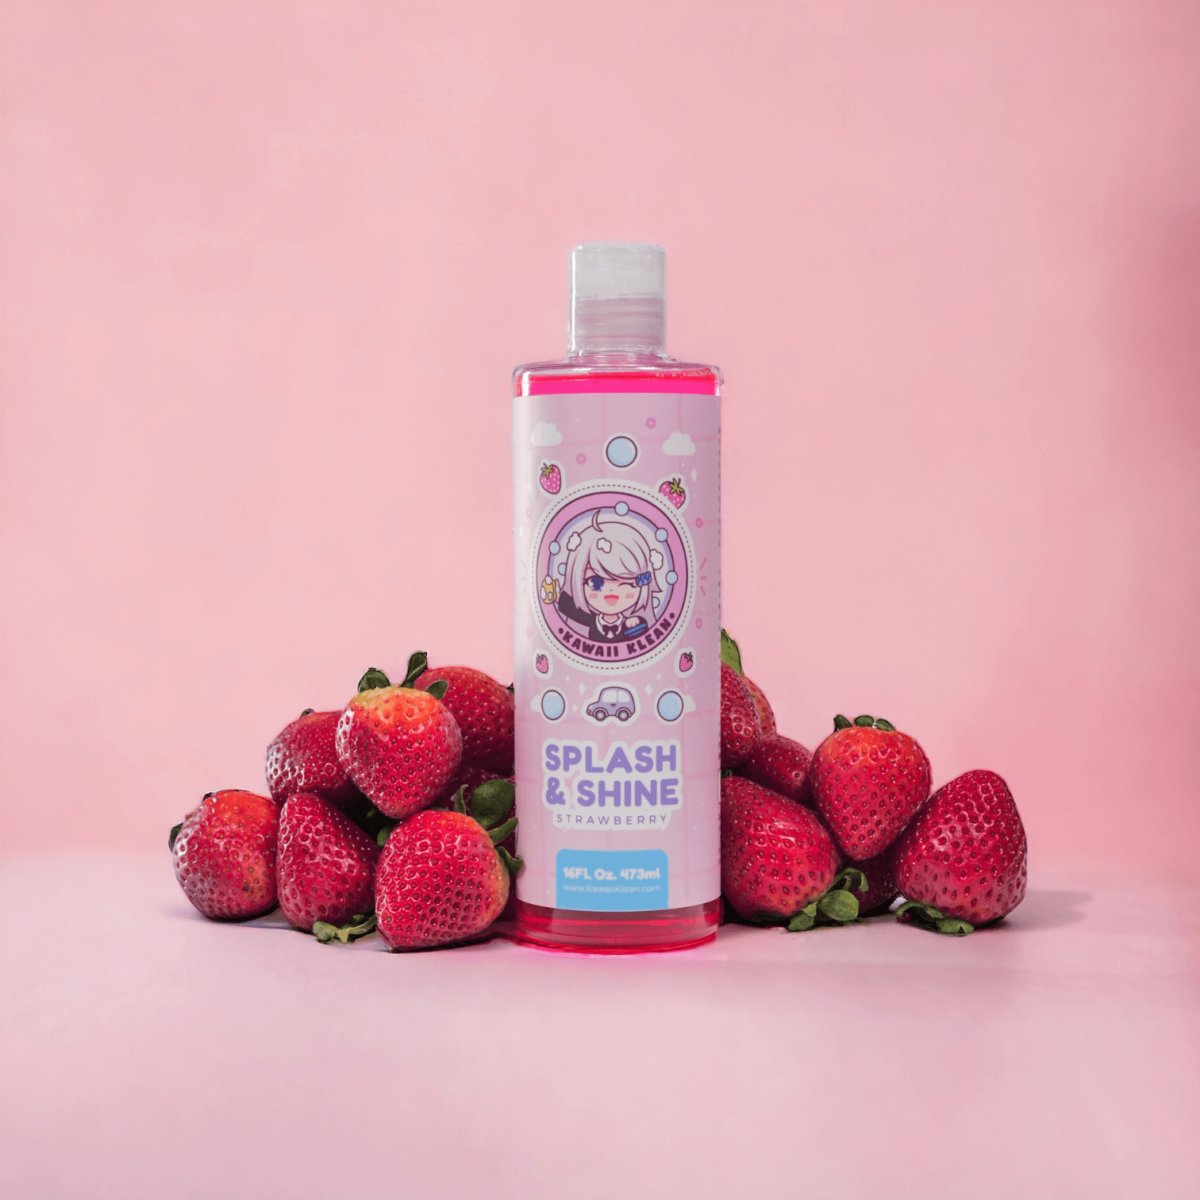 Front view of the 'Strawberry Splash and Shine' 16 oz pink car soap bottle, featuring the vibrant label, encircled by ripe strawberries, showcasing the soap's strawberry-infused formula and appeal.